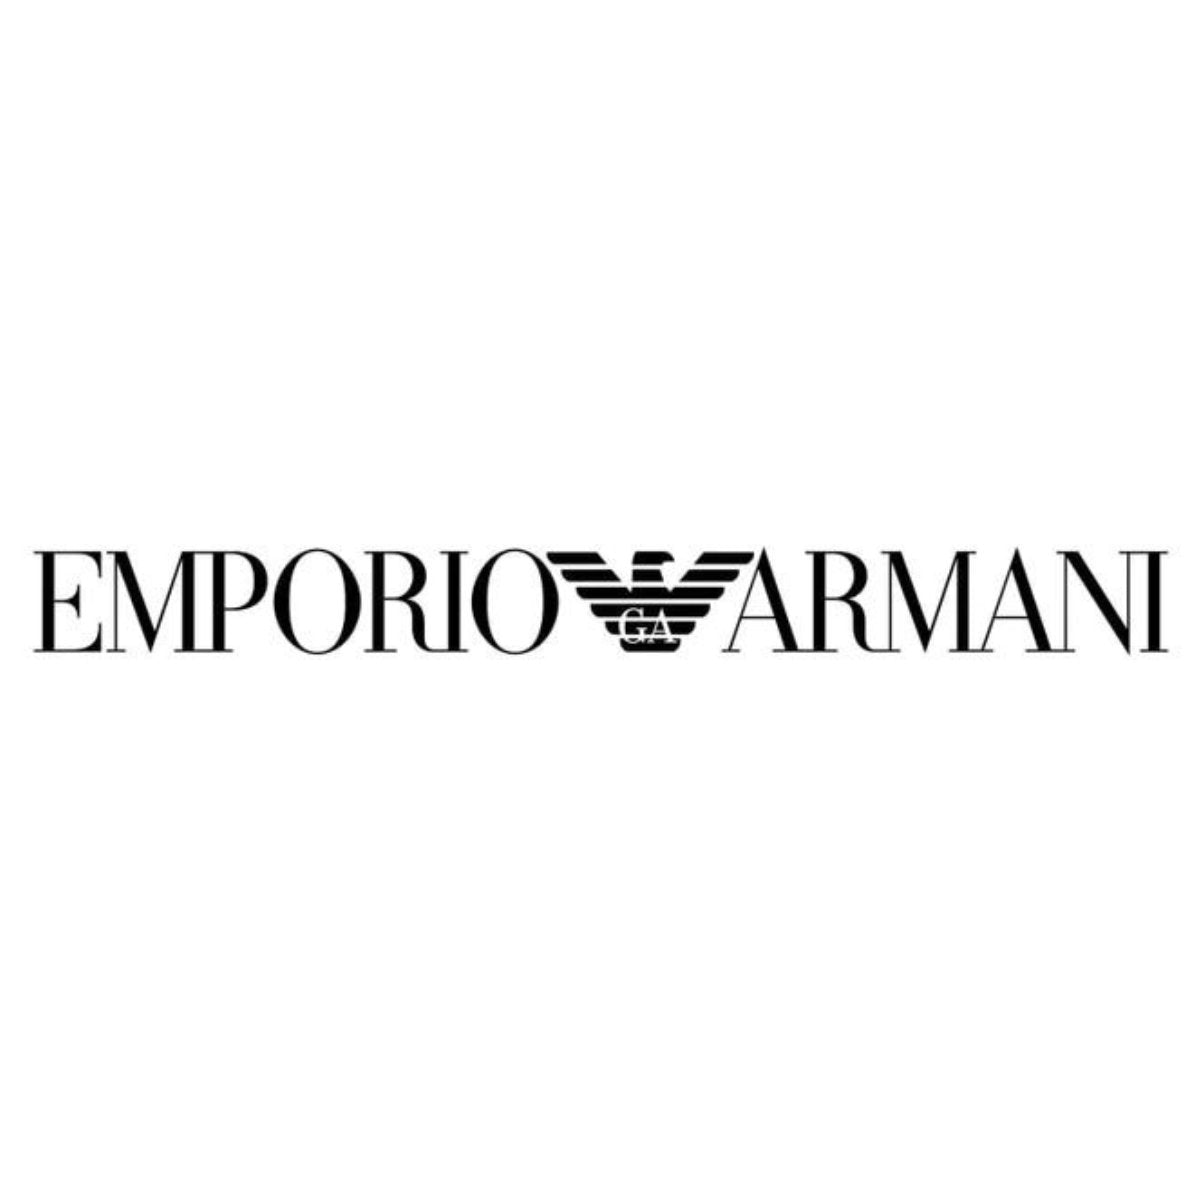 "Emporio Armani eyewear collection at Optorium, featuring stylish sunglasses and optical frames for a sophisticated look."